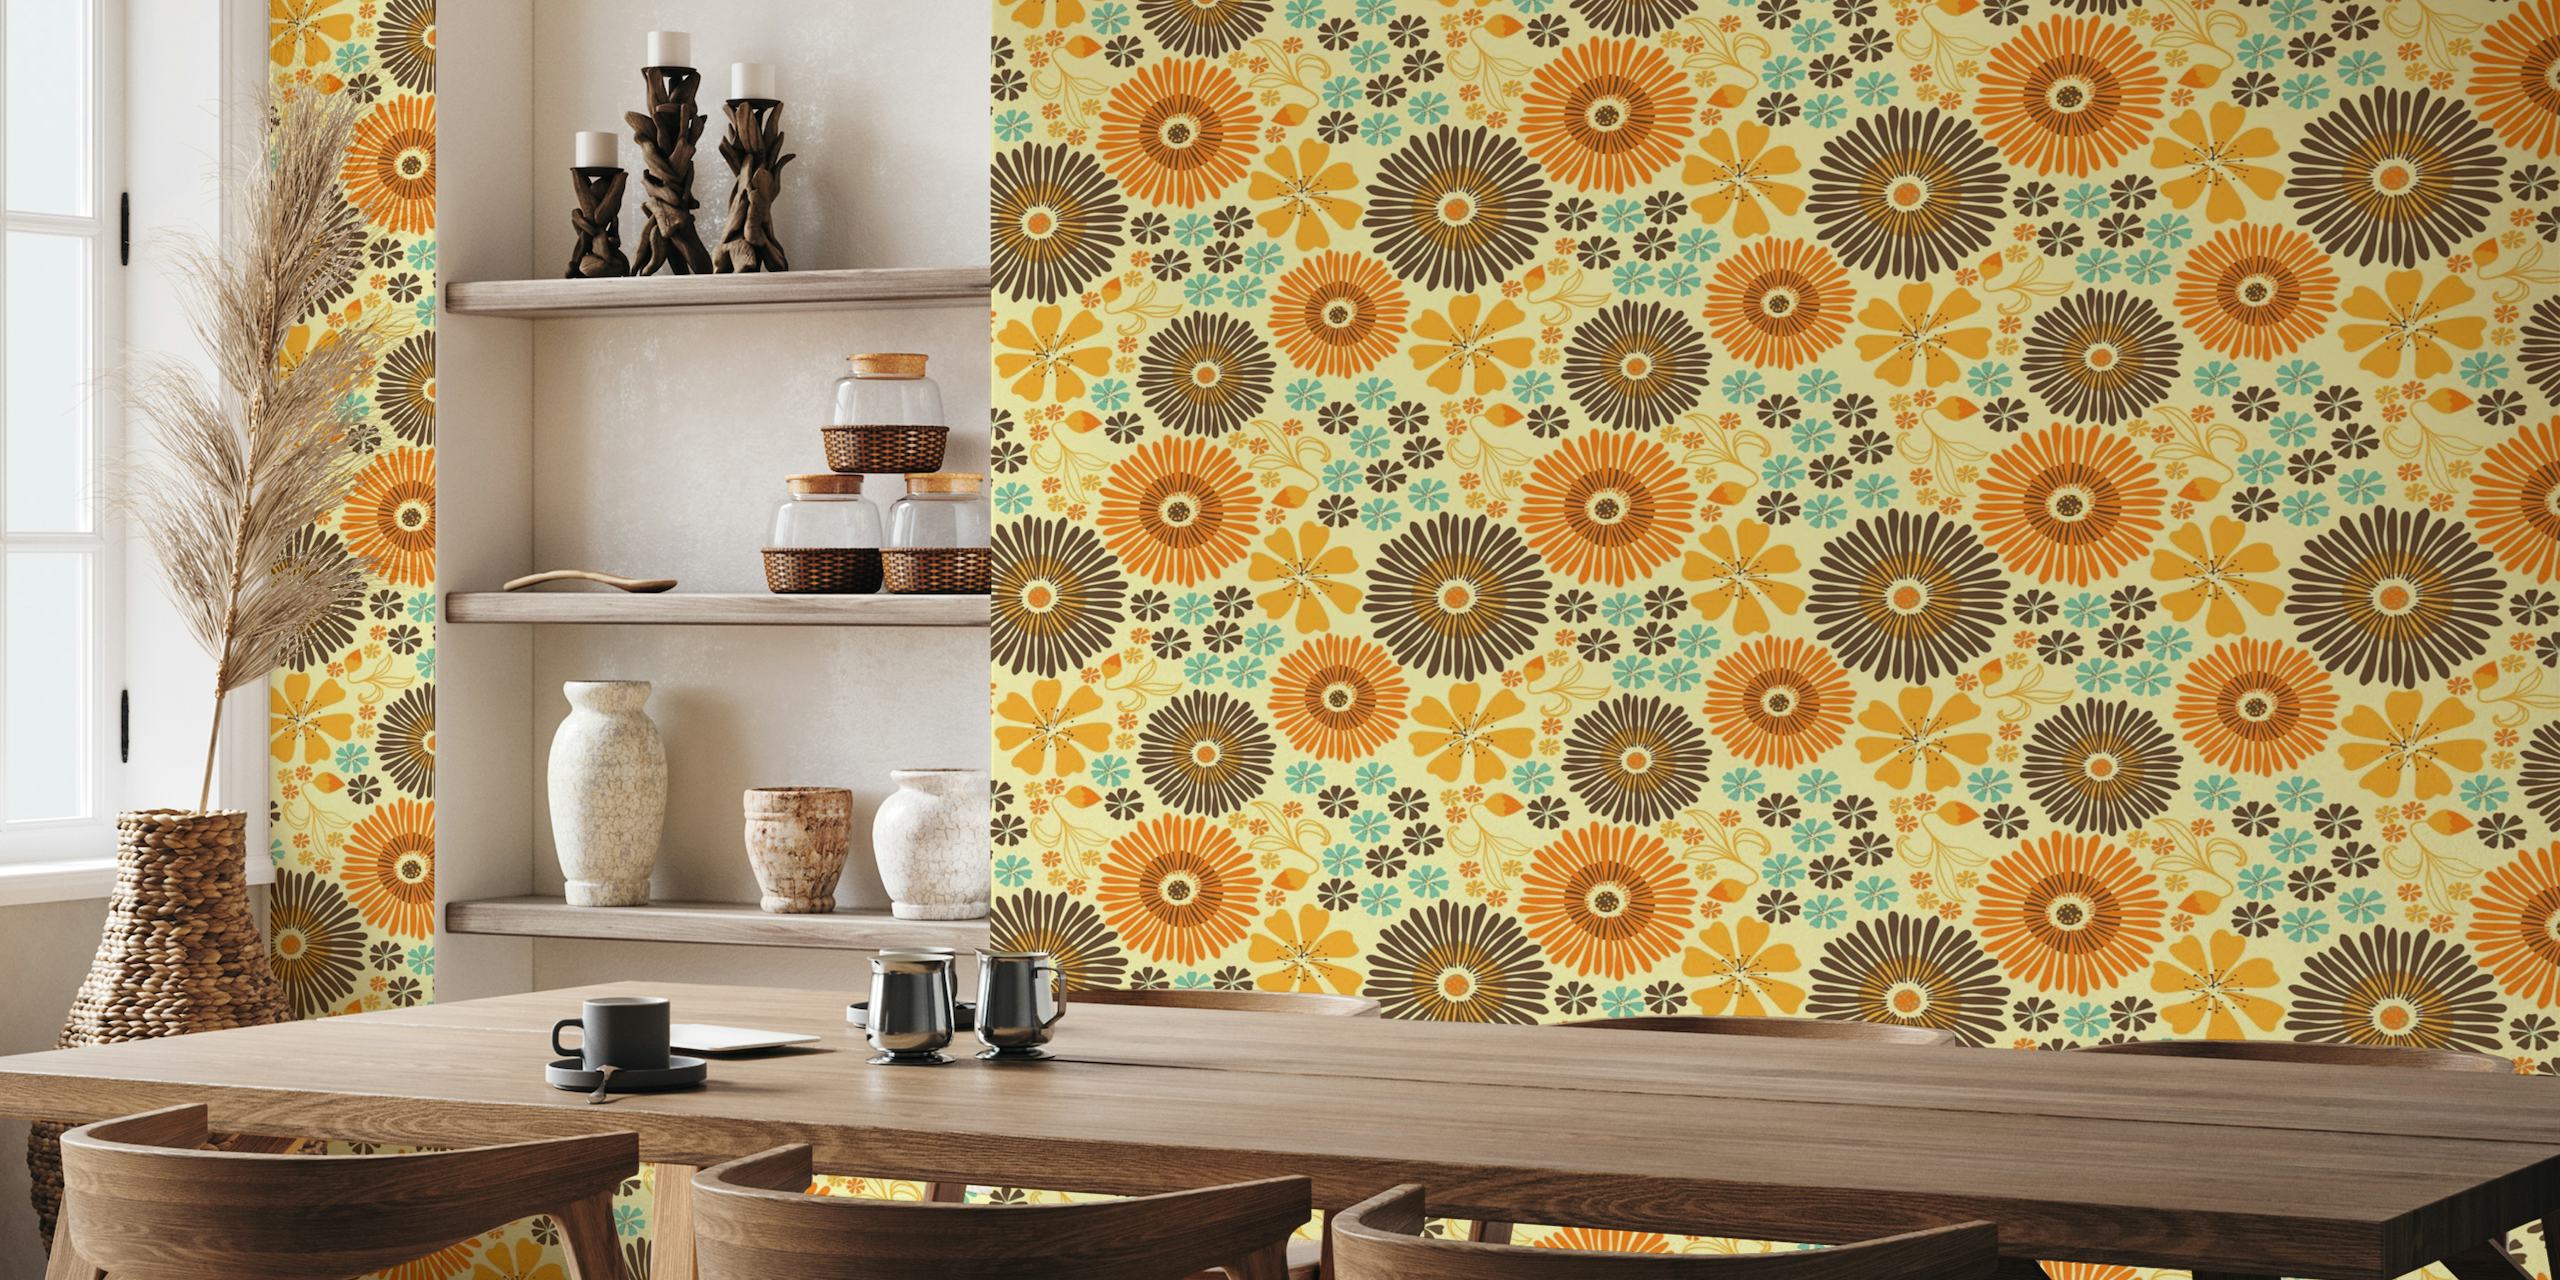 Retro floral pattern wall mural with warm yellow, orange, and brown tones